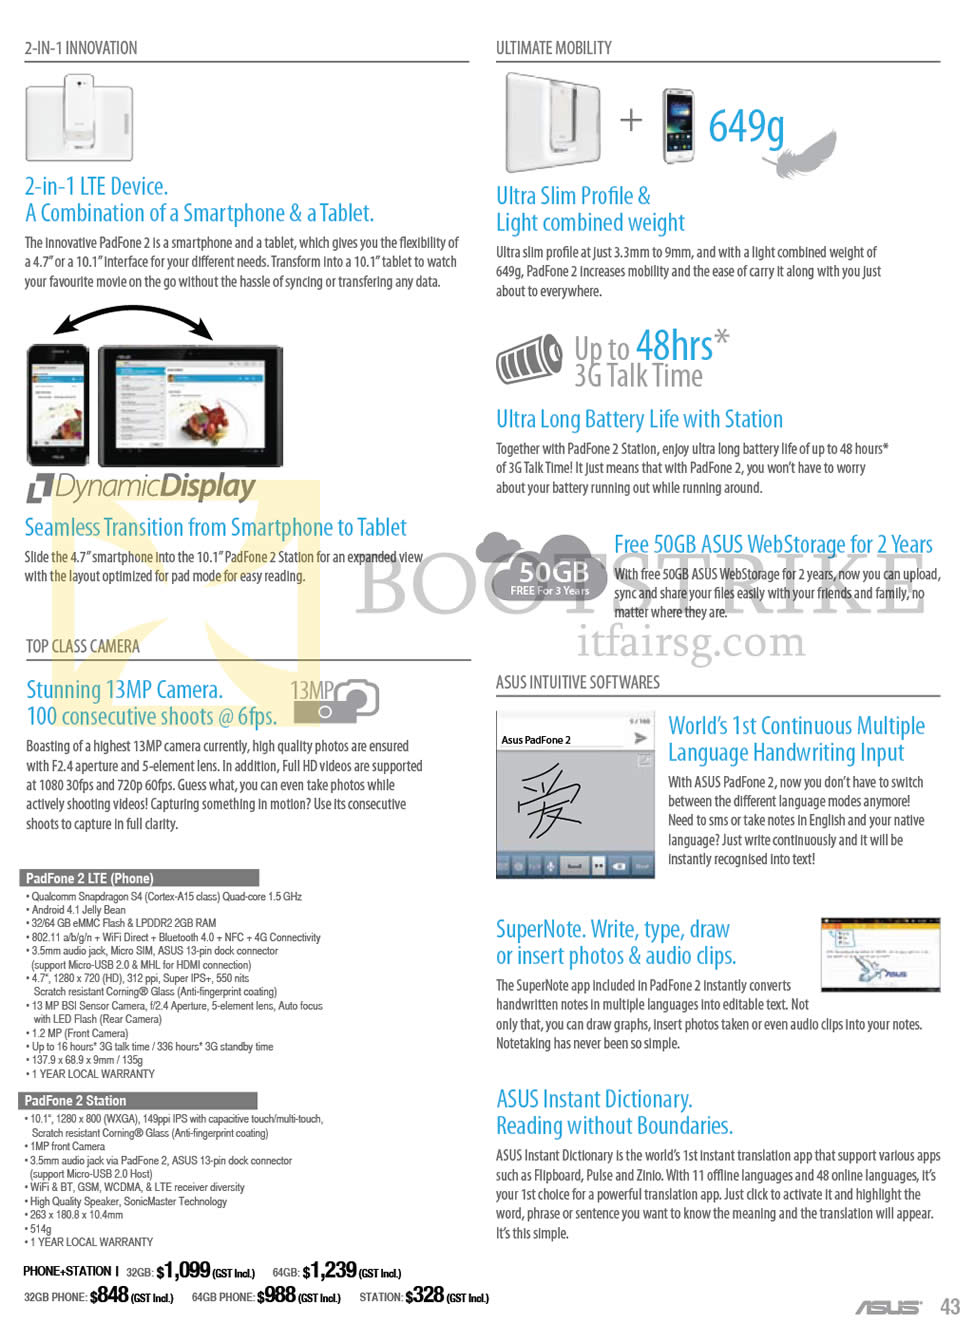 IT SHOW 2013 price list image brochure of ASUS Notebooks PadFone 2 LTE (Phone), PadFone 2 Station, Features